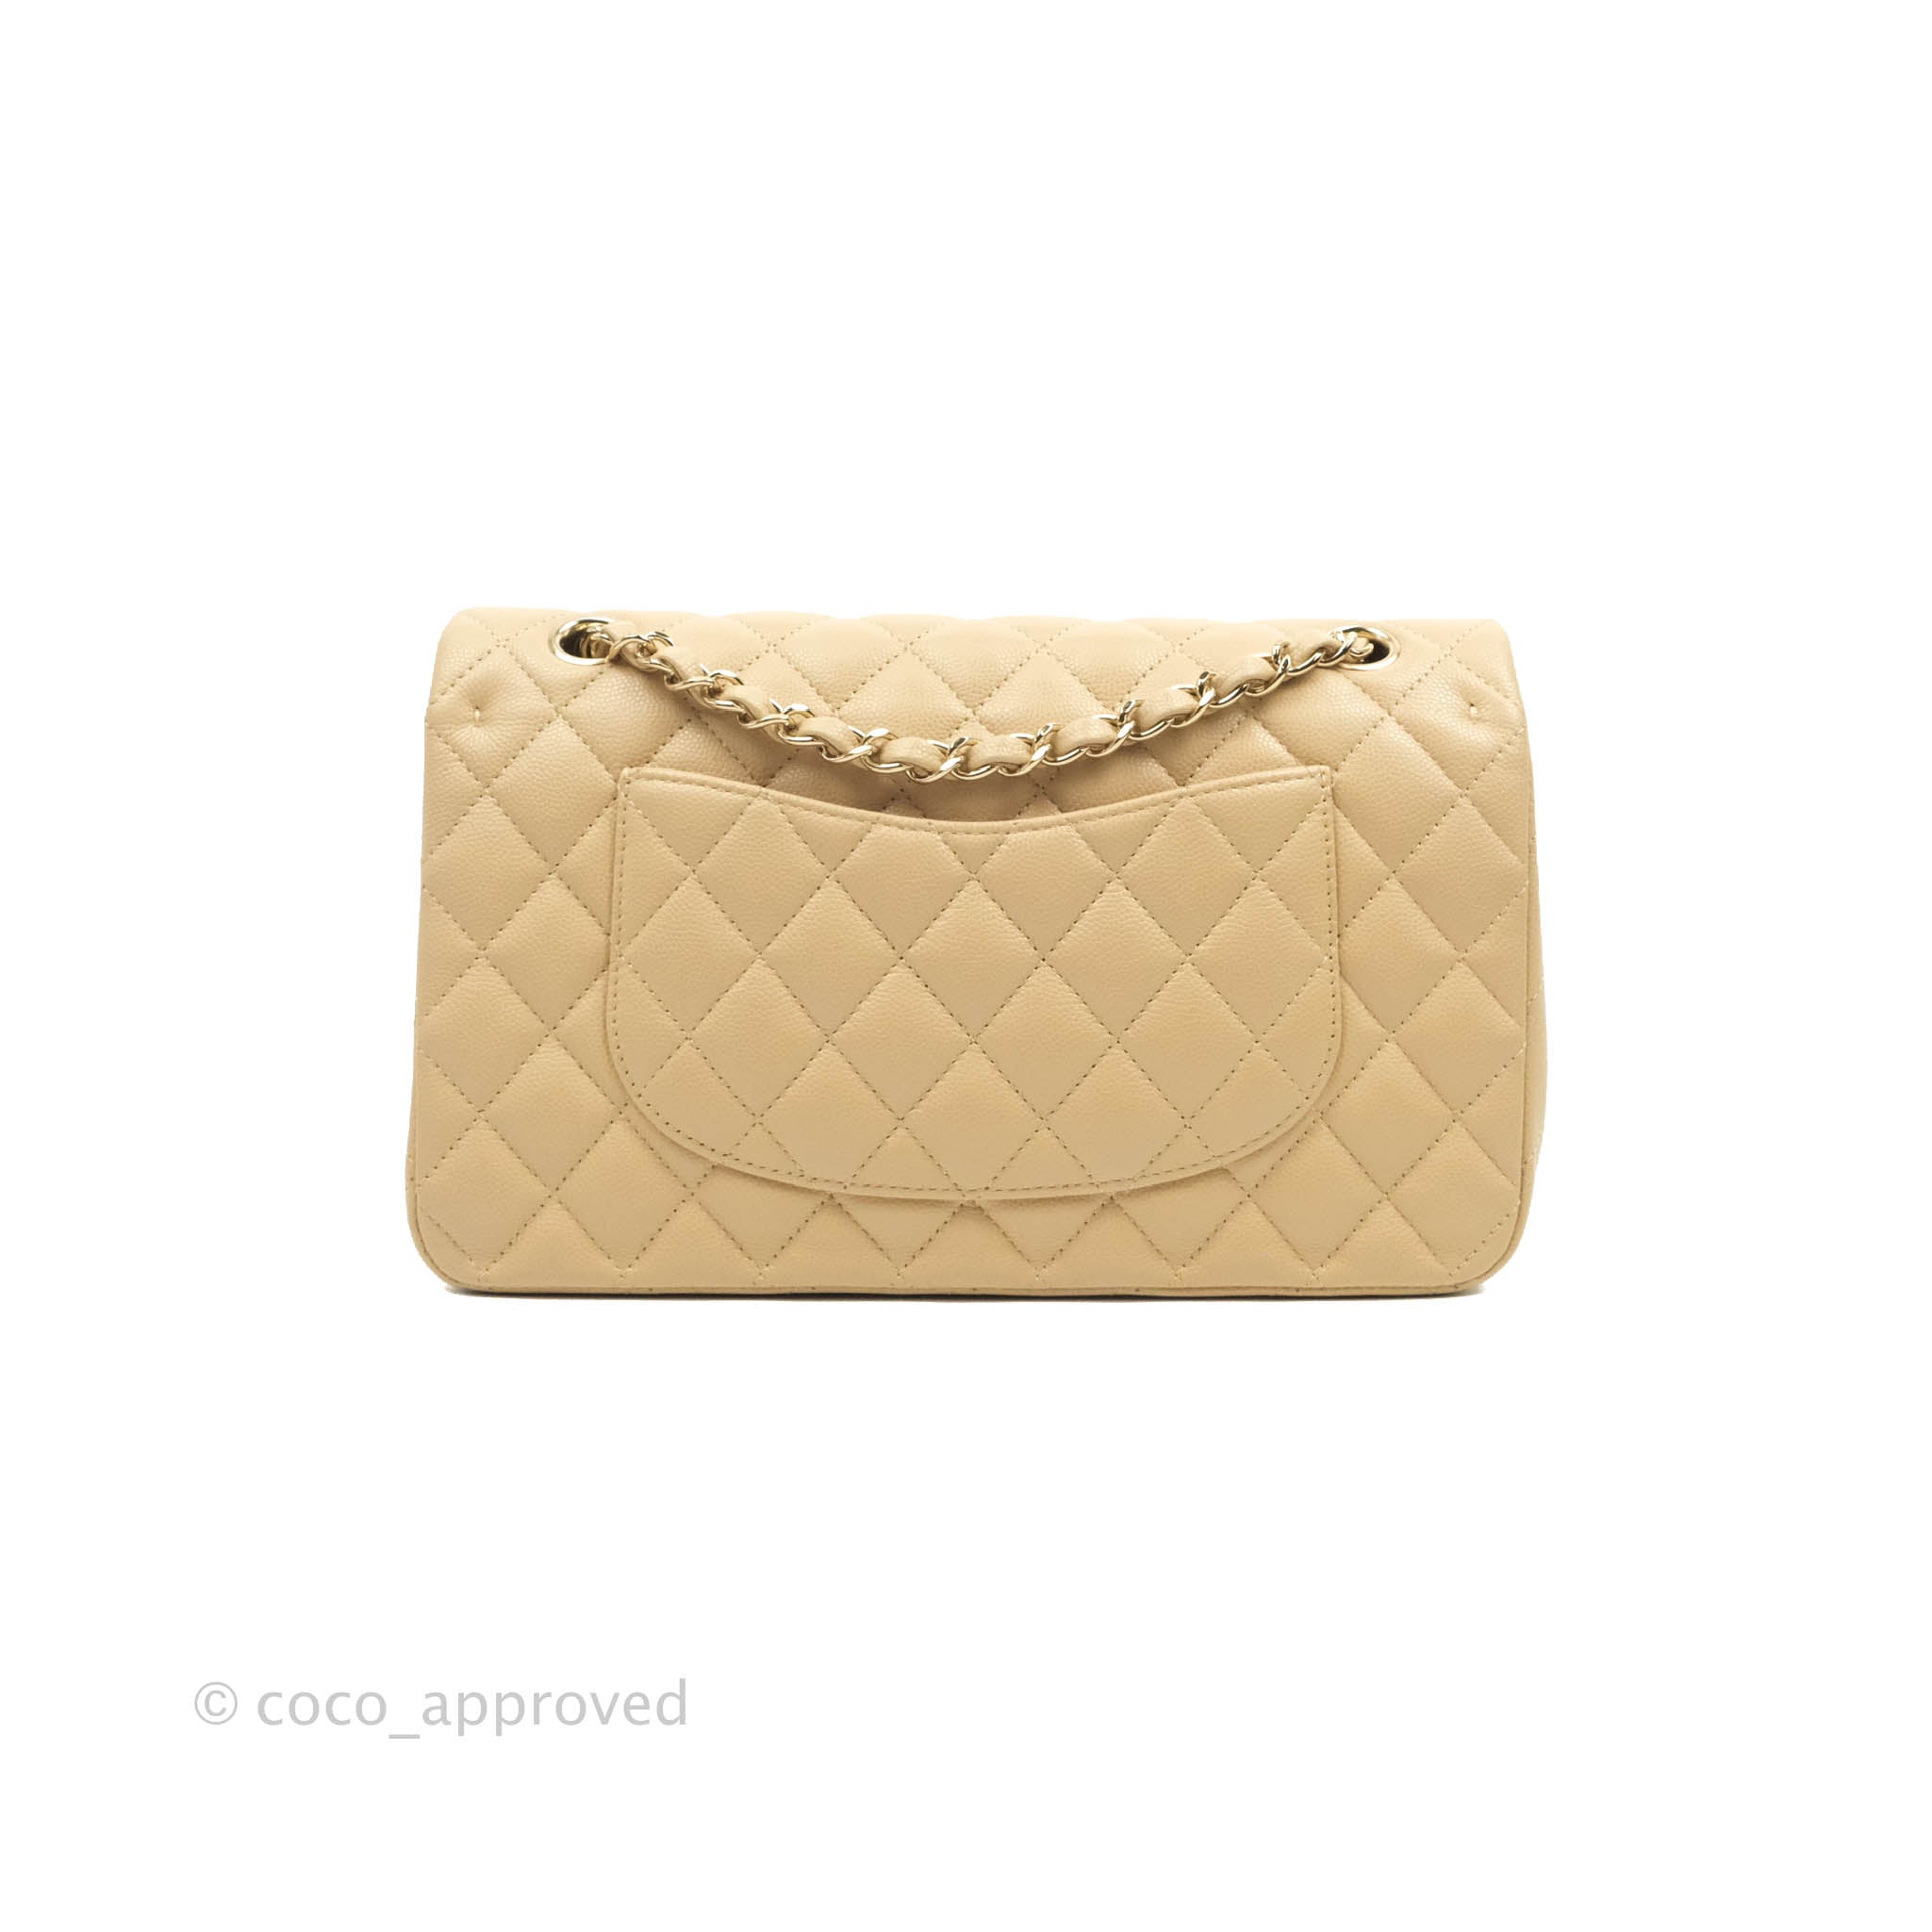 Chanel Pre-owned Mint Condition M/L Beige Caviar Classic Flap With